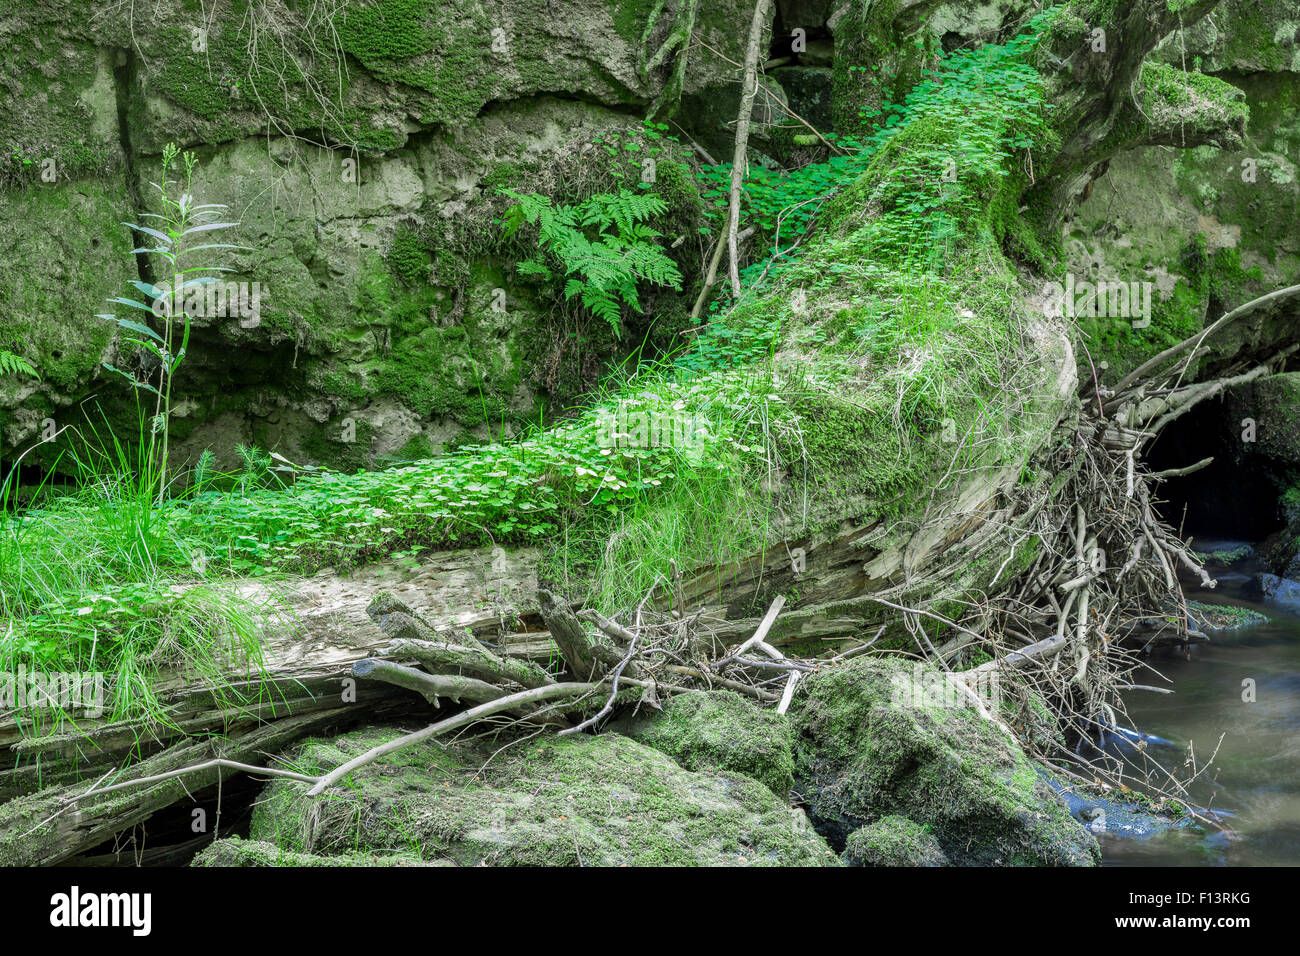 Rotten tree trunk covered with moss and forest plants Stock Photo